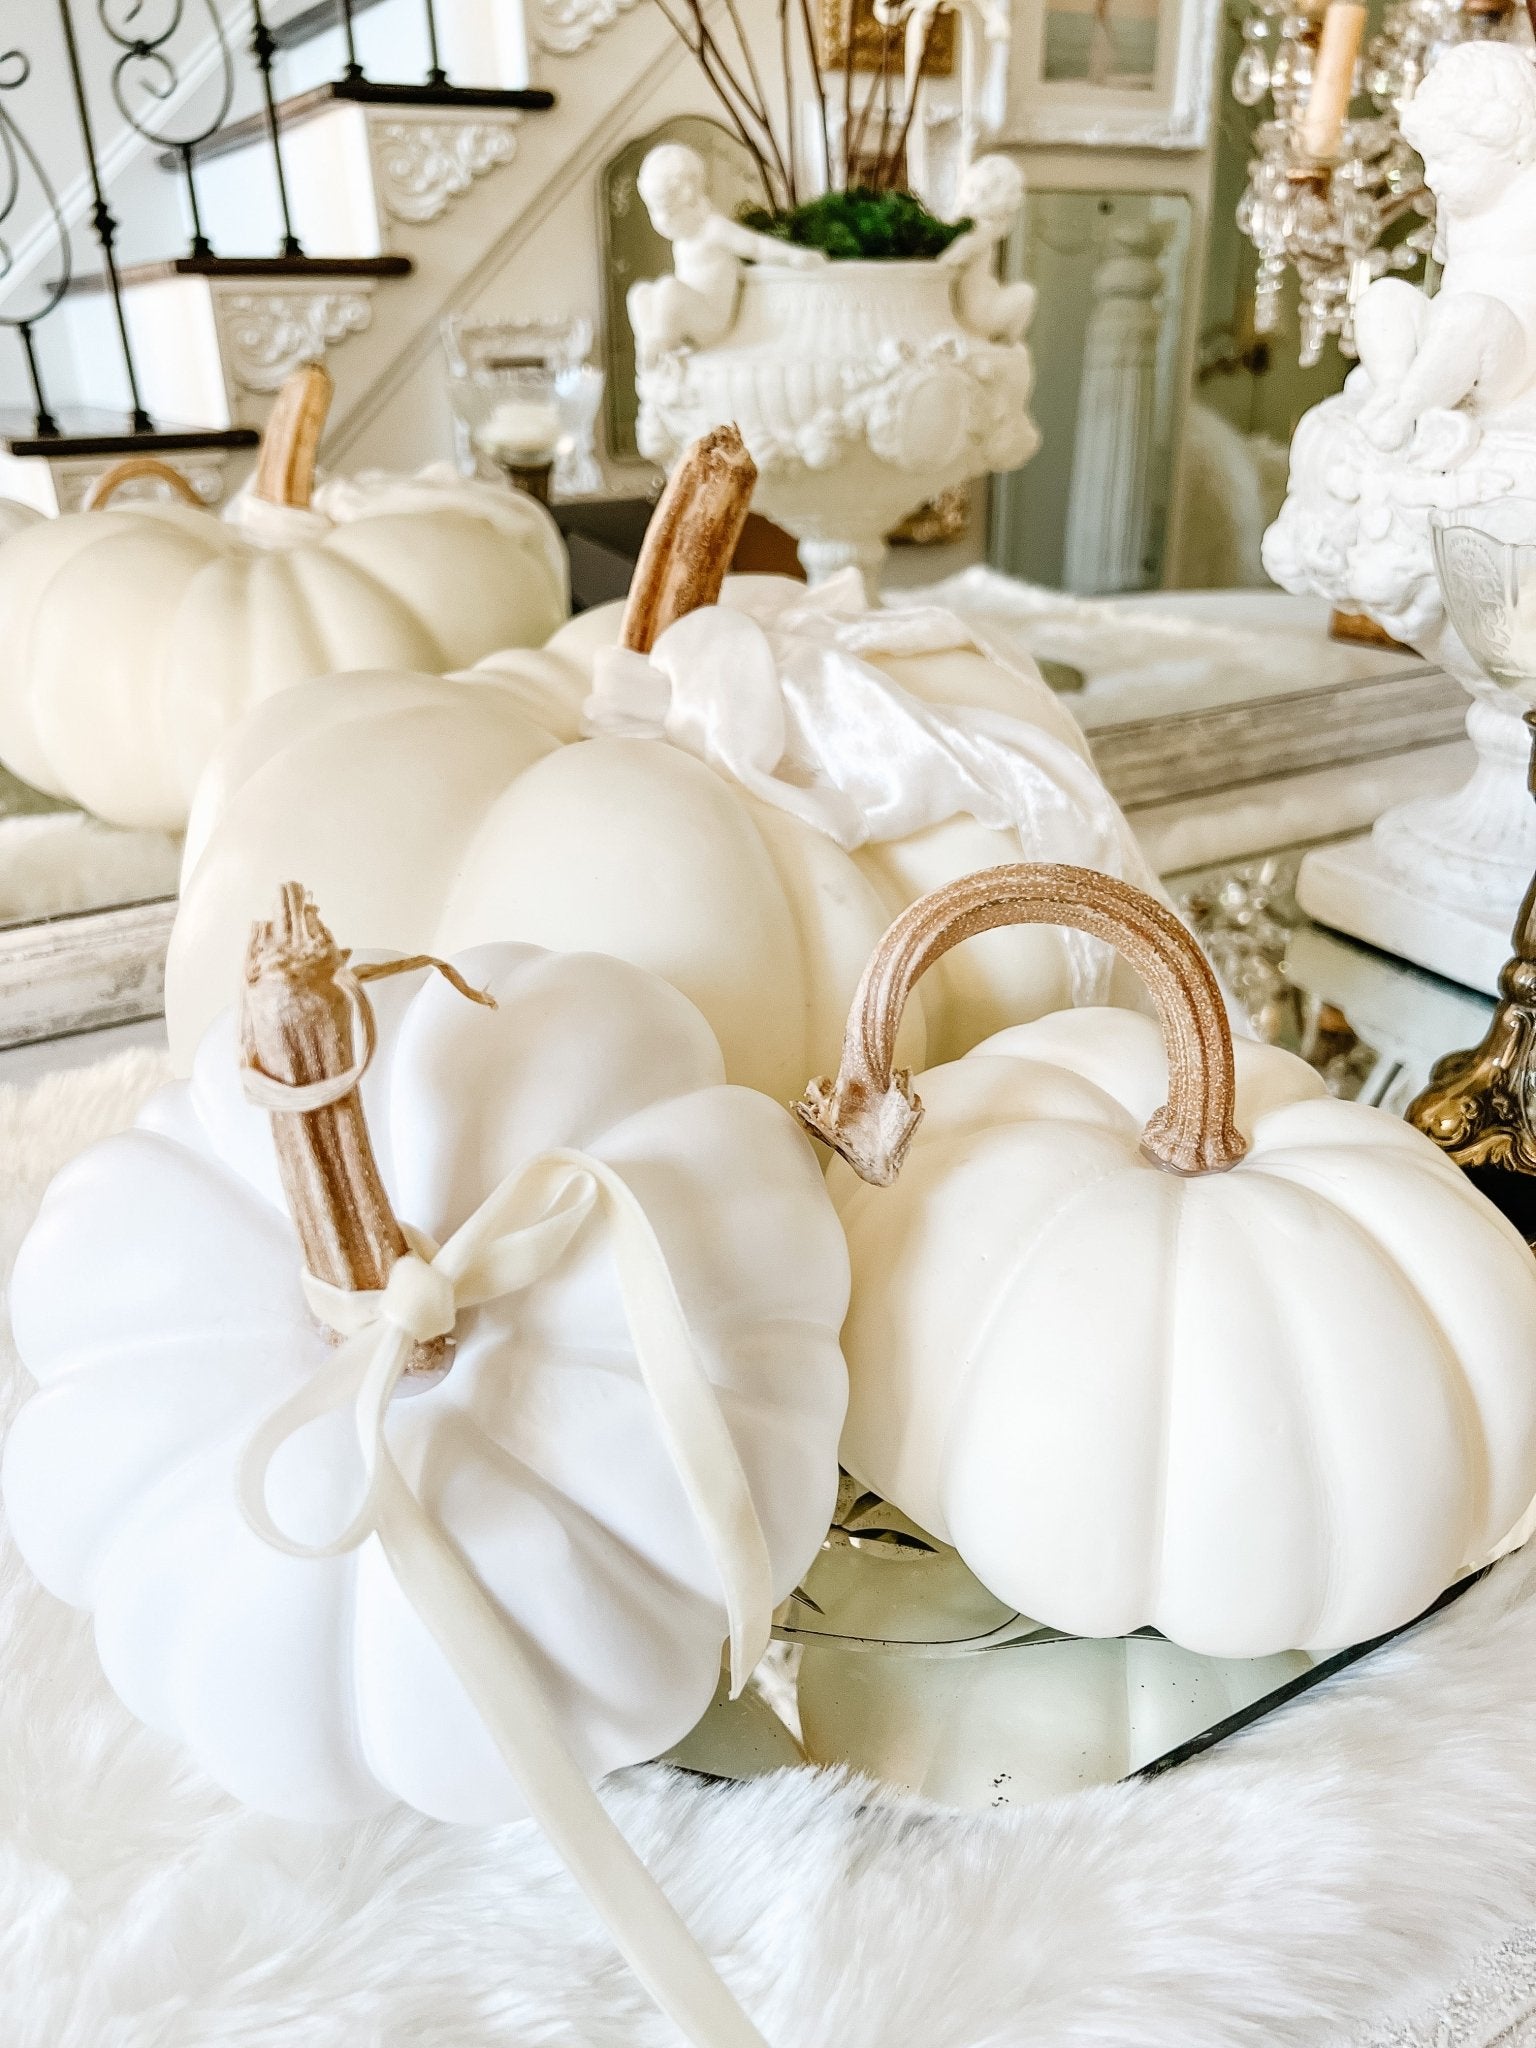 Real or Faux White Pumpkins? - Ivory Lane Home